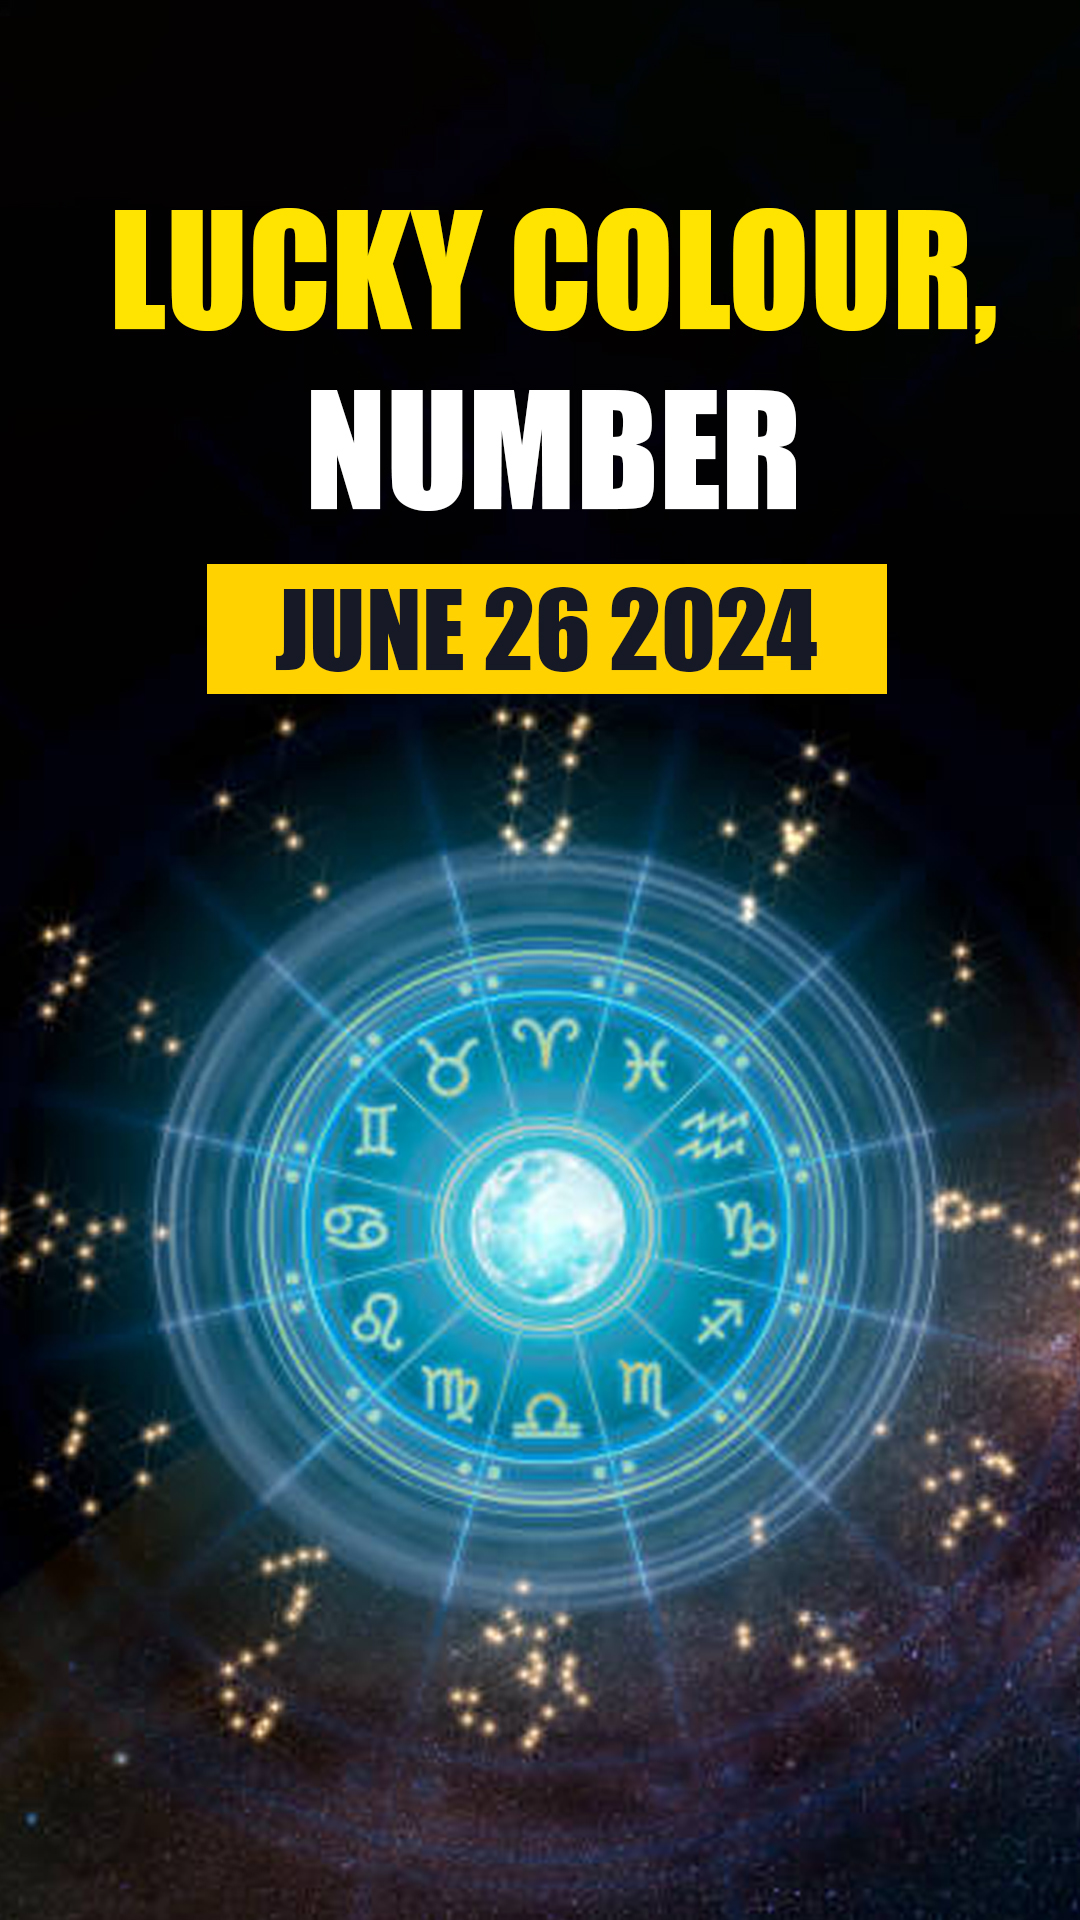 Know lucky colour, number of all zodiac signs in horoscope for June 26, 2024